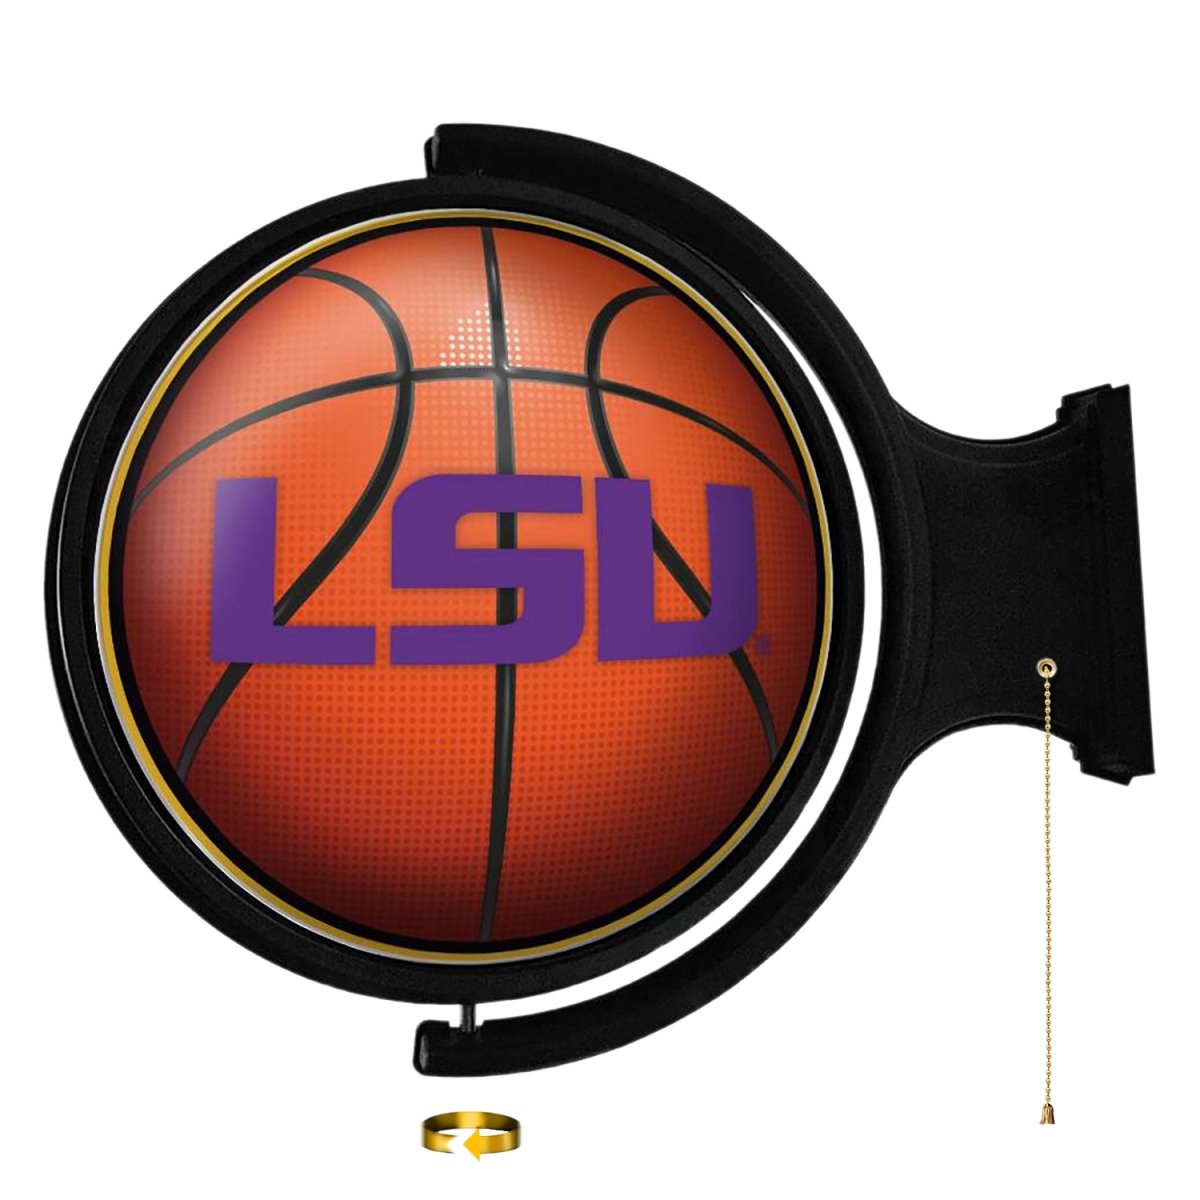 LSU Tigers: Basketball - Original Round Rotating Lighted Wall Sign - The Fan-Brand